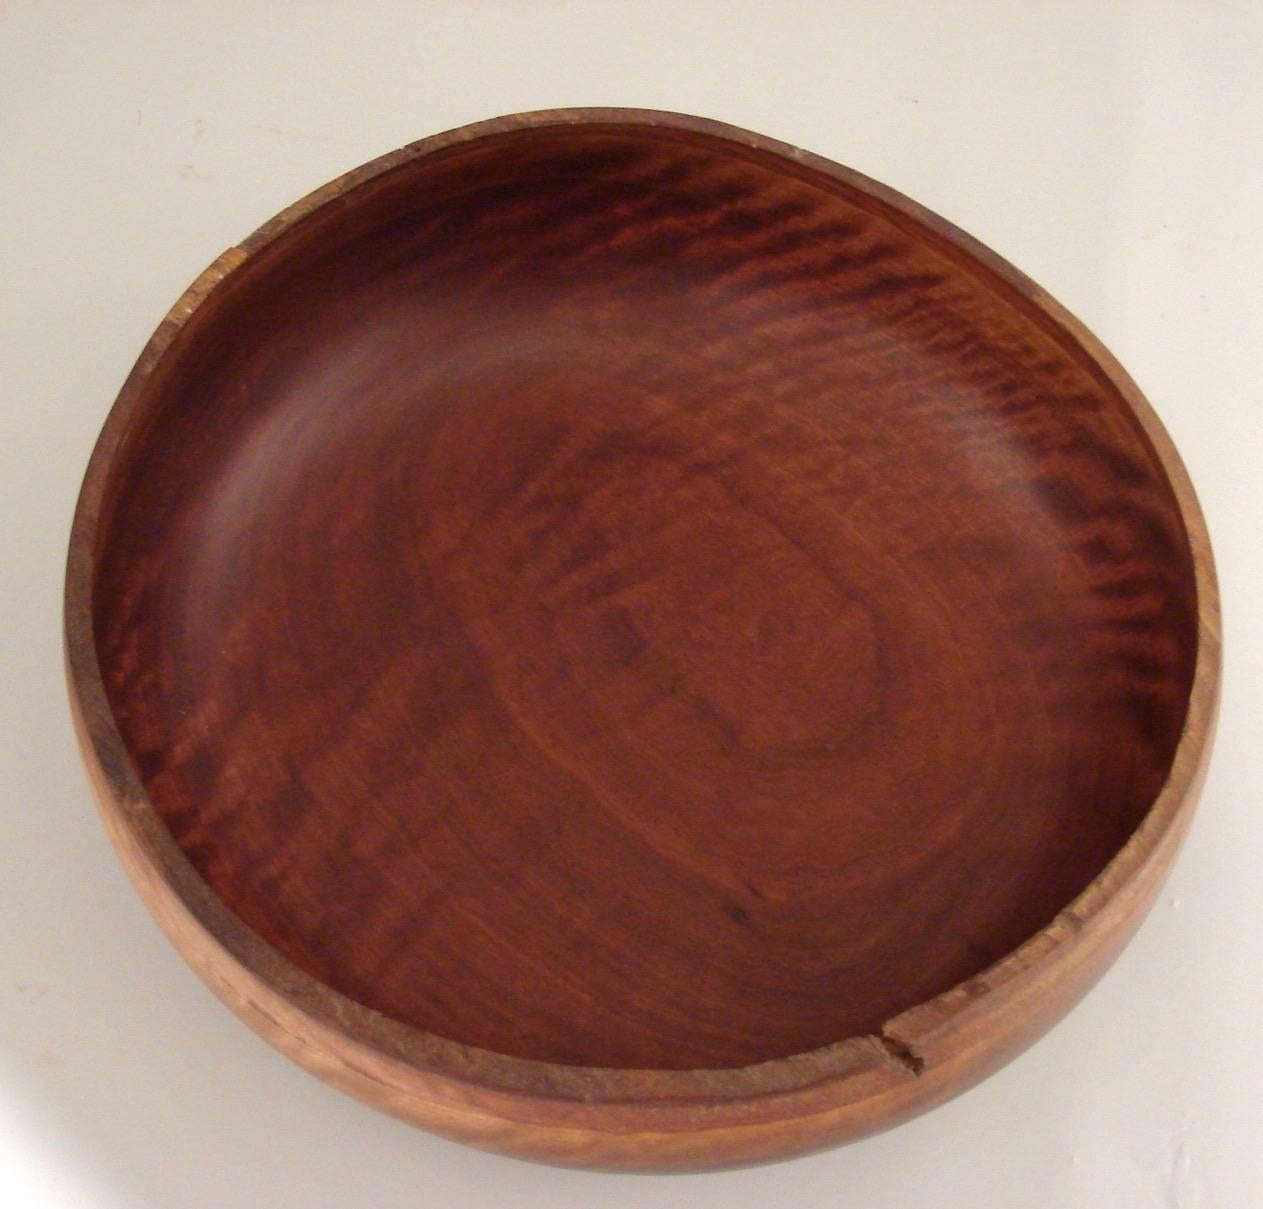 A lovely turned red gum eucalyptus bowl of large size with a live edge, made and signed by John T. Doyen, a former University of California professor of entomology.